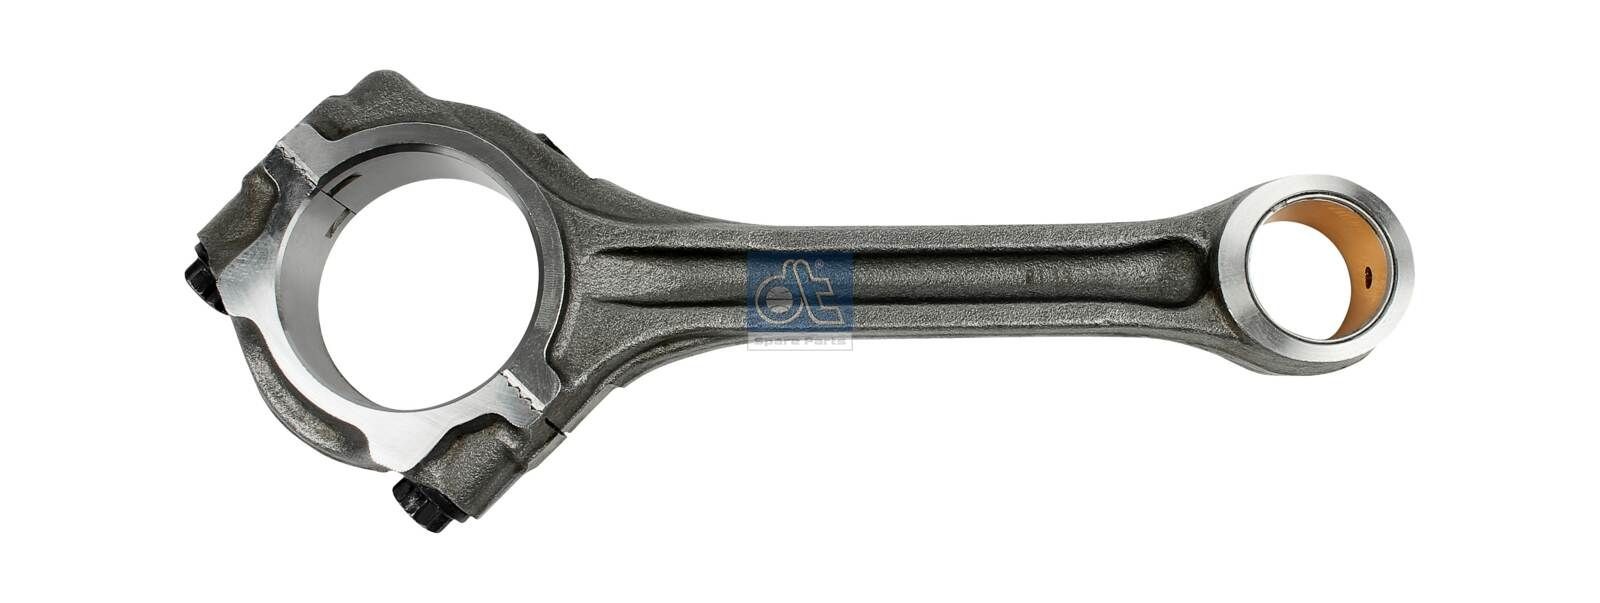 DT Spare Parts 4.61112 Connecting Rod 352 030 49 20